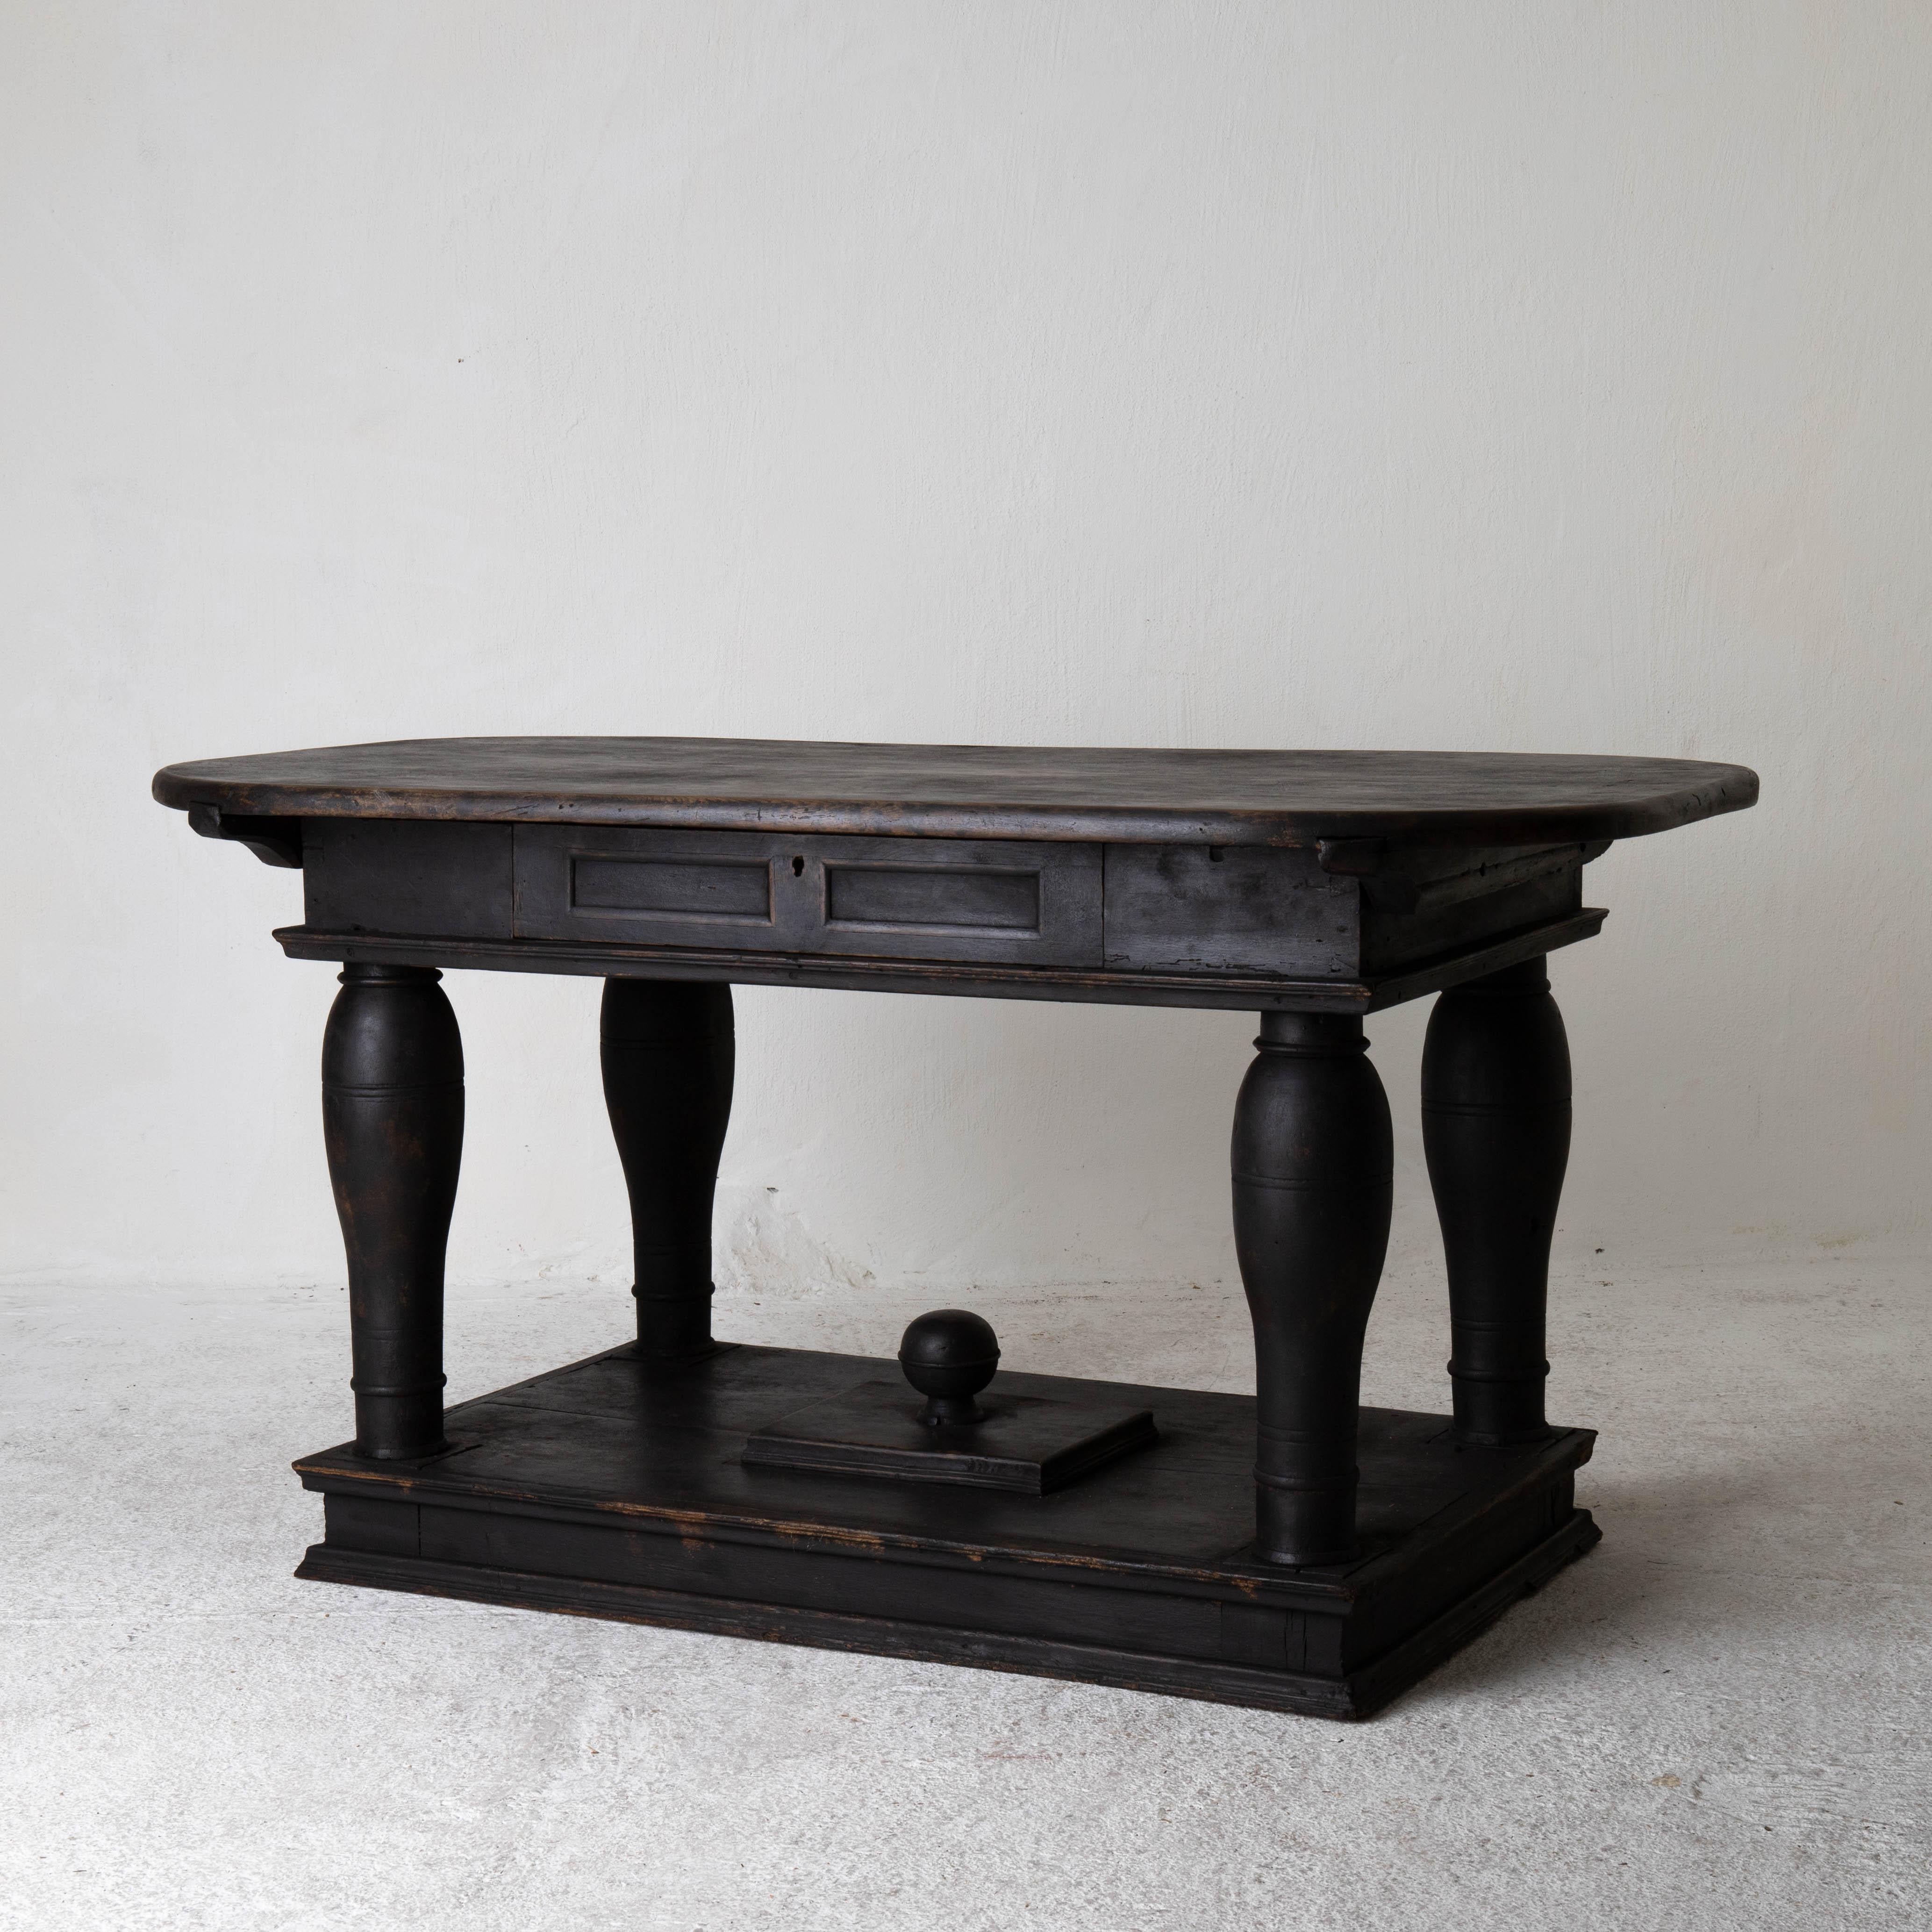 Table centre table Swedish Baroque 1650-1750 black Sweden. A table made during the 18th century and the Baroque period in Sweden. Refinished in our laserow black. A so called judge table.

  